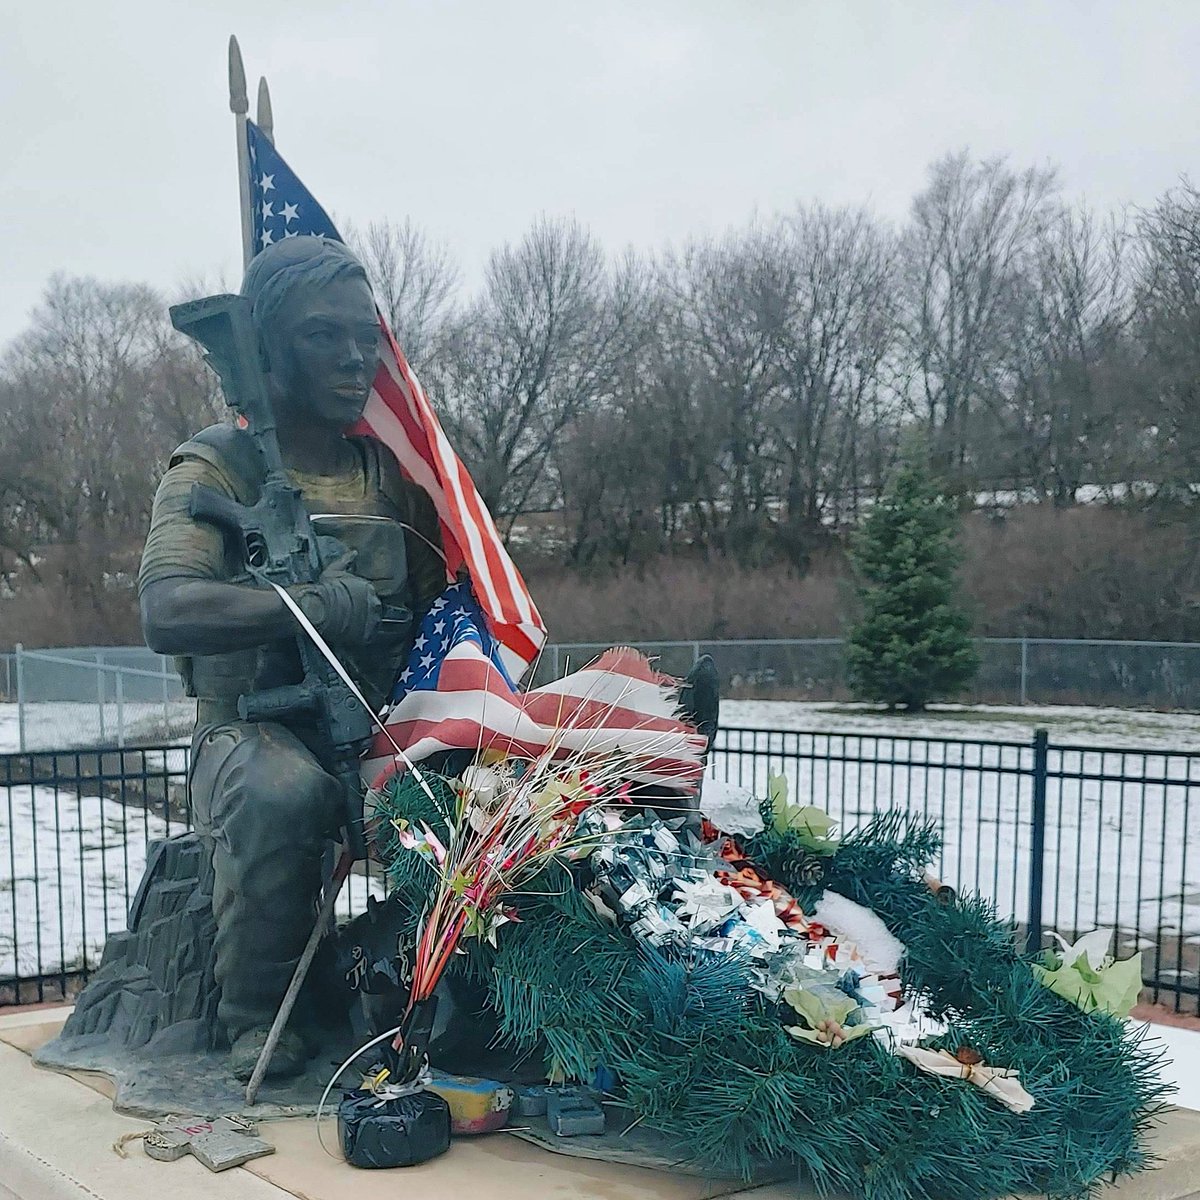 The John Douangdara Memorial Dog Park. He & 29 Americans, including members of Seal Team 6 & 8 Afghans were killed 10 years ago in a helicopter crash caused by an RPG attack. He was 26 years old. His family were refugees from Laos. It was 36 years after the war. #MemorialDay2021 https://t.co/rVjngeFGXl